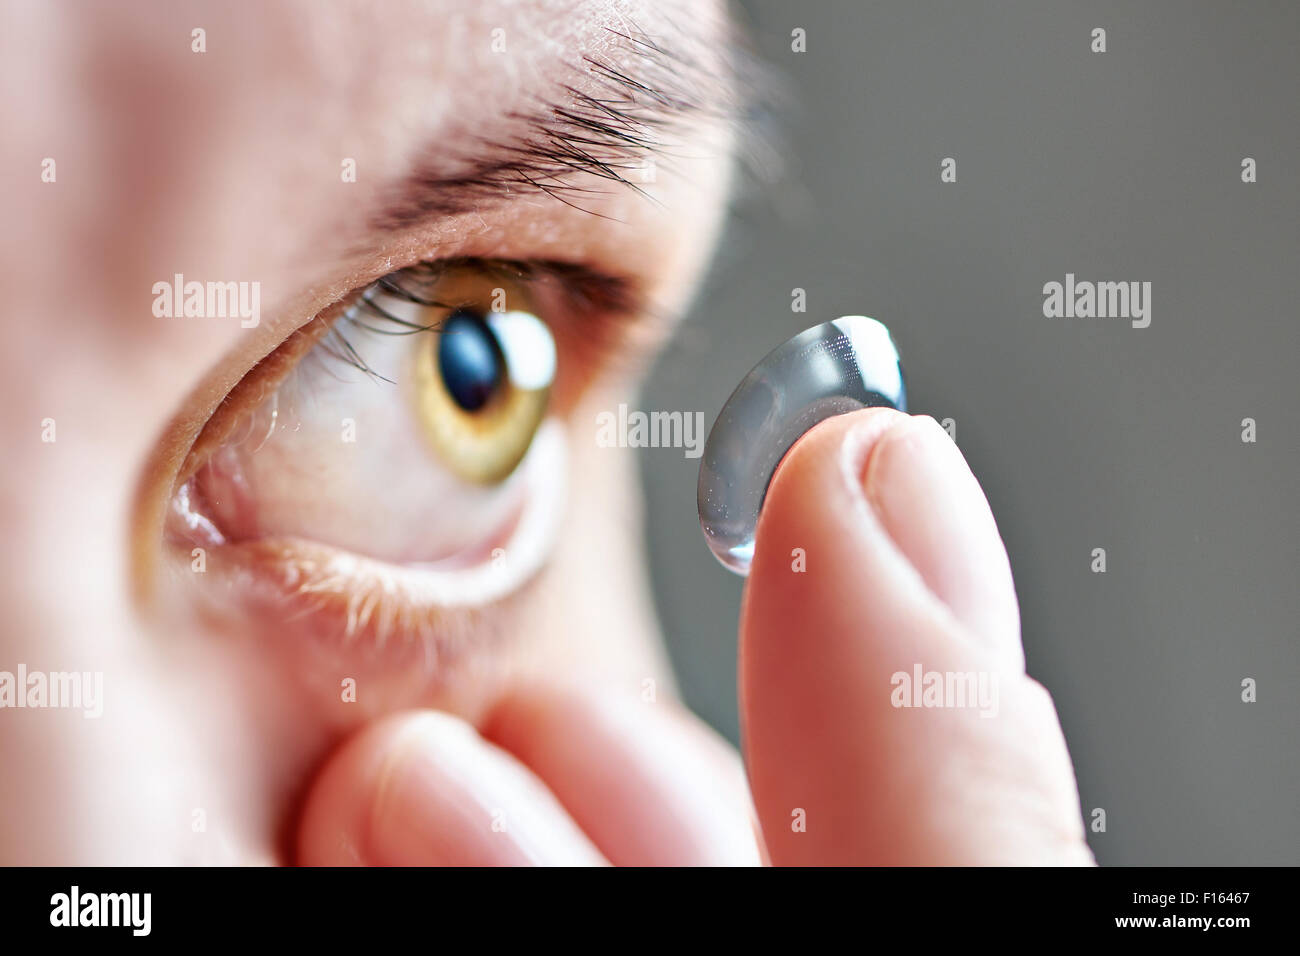 Medicine and vision - young woman with contact lens Stock Photo